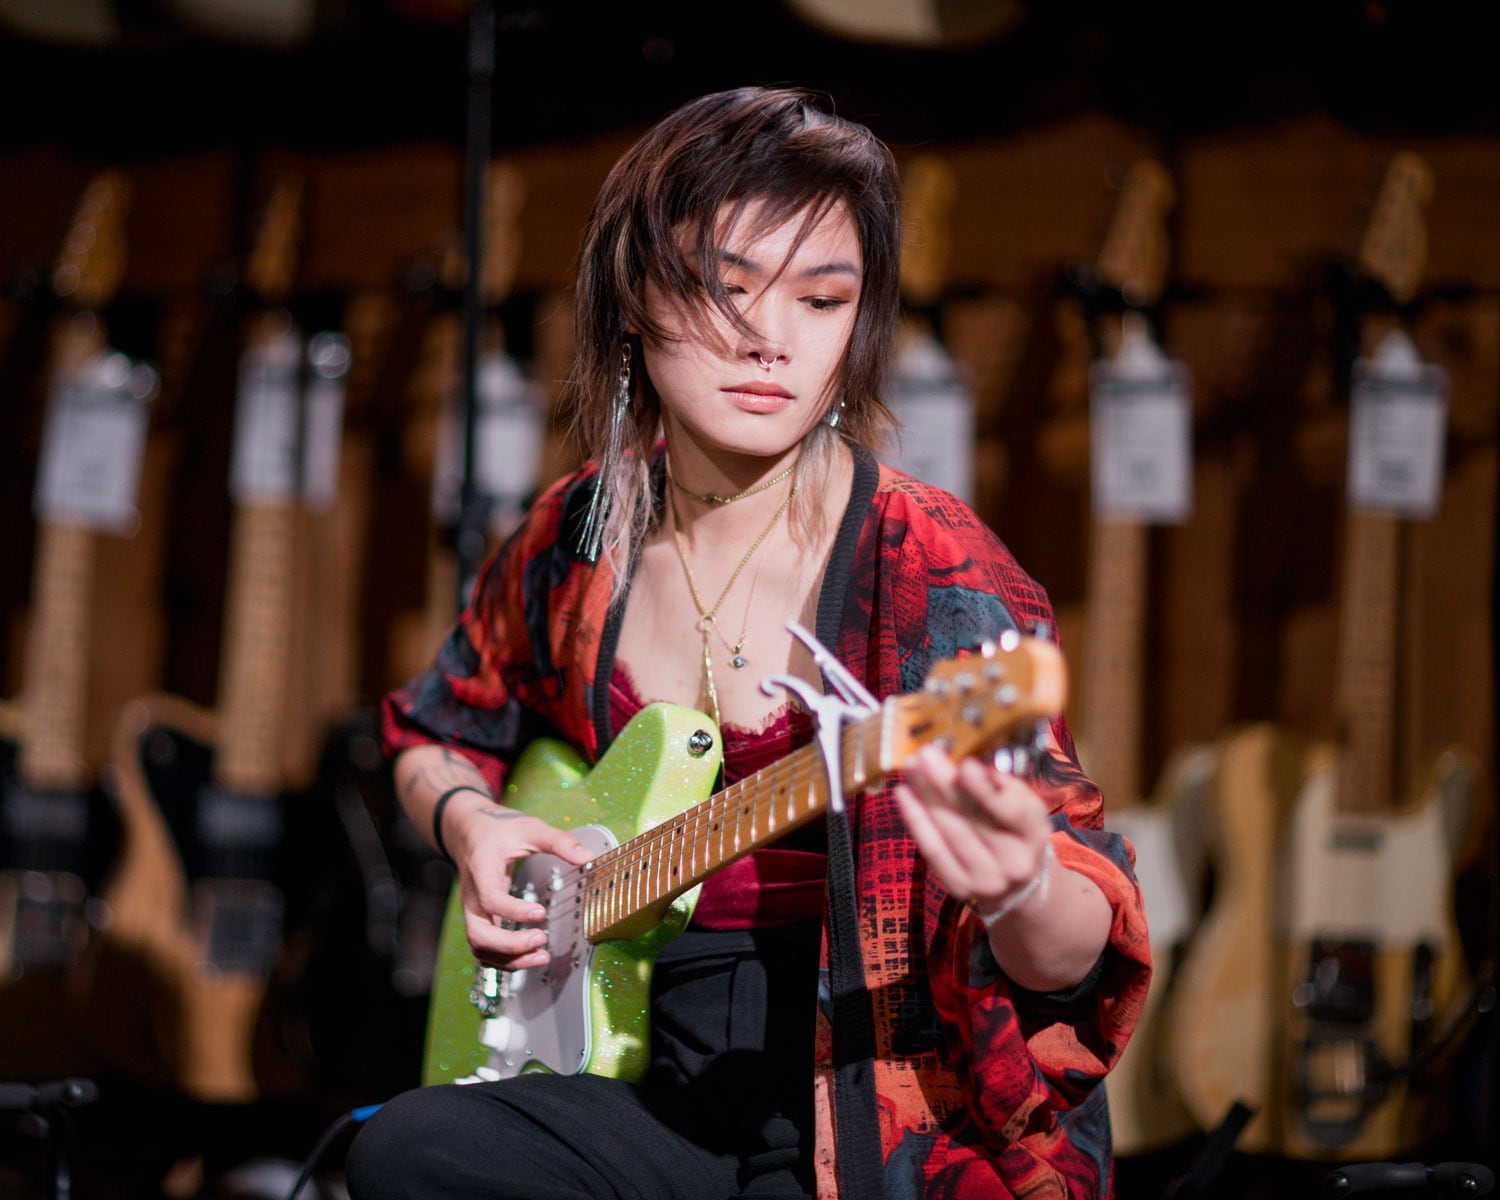 Yvette Young at the Guitar Center x She Shreds Panel at Guitar Center Hollywood